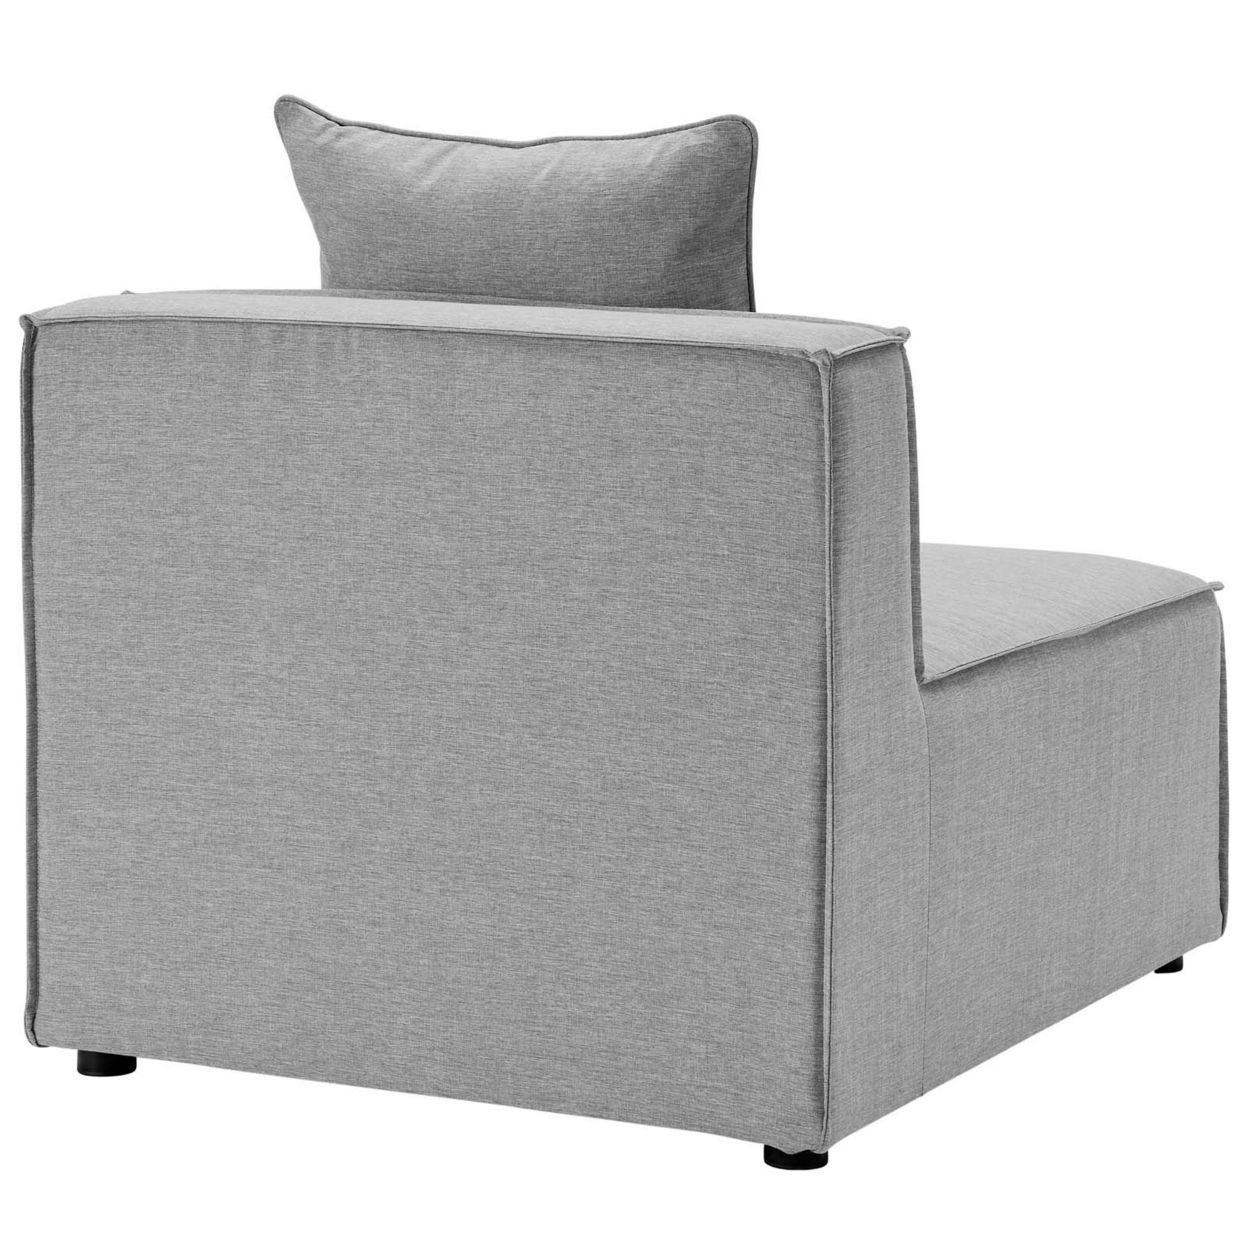 Saybrook Outdoor Patio Upholstered Sectional Sofa Armless Chair, Gray